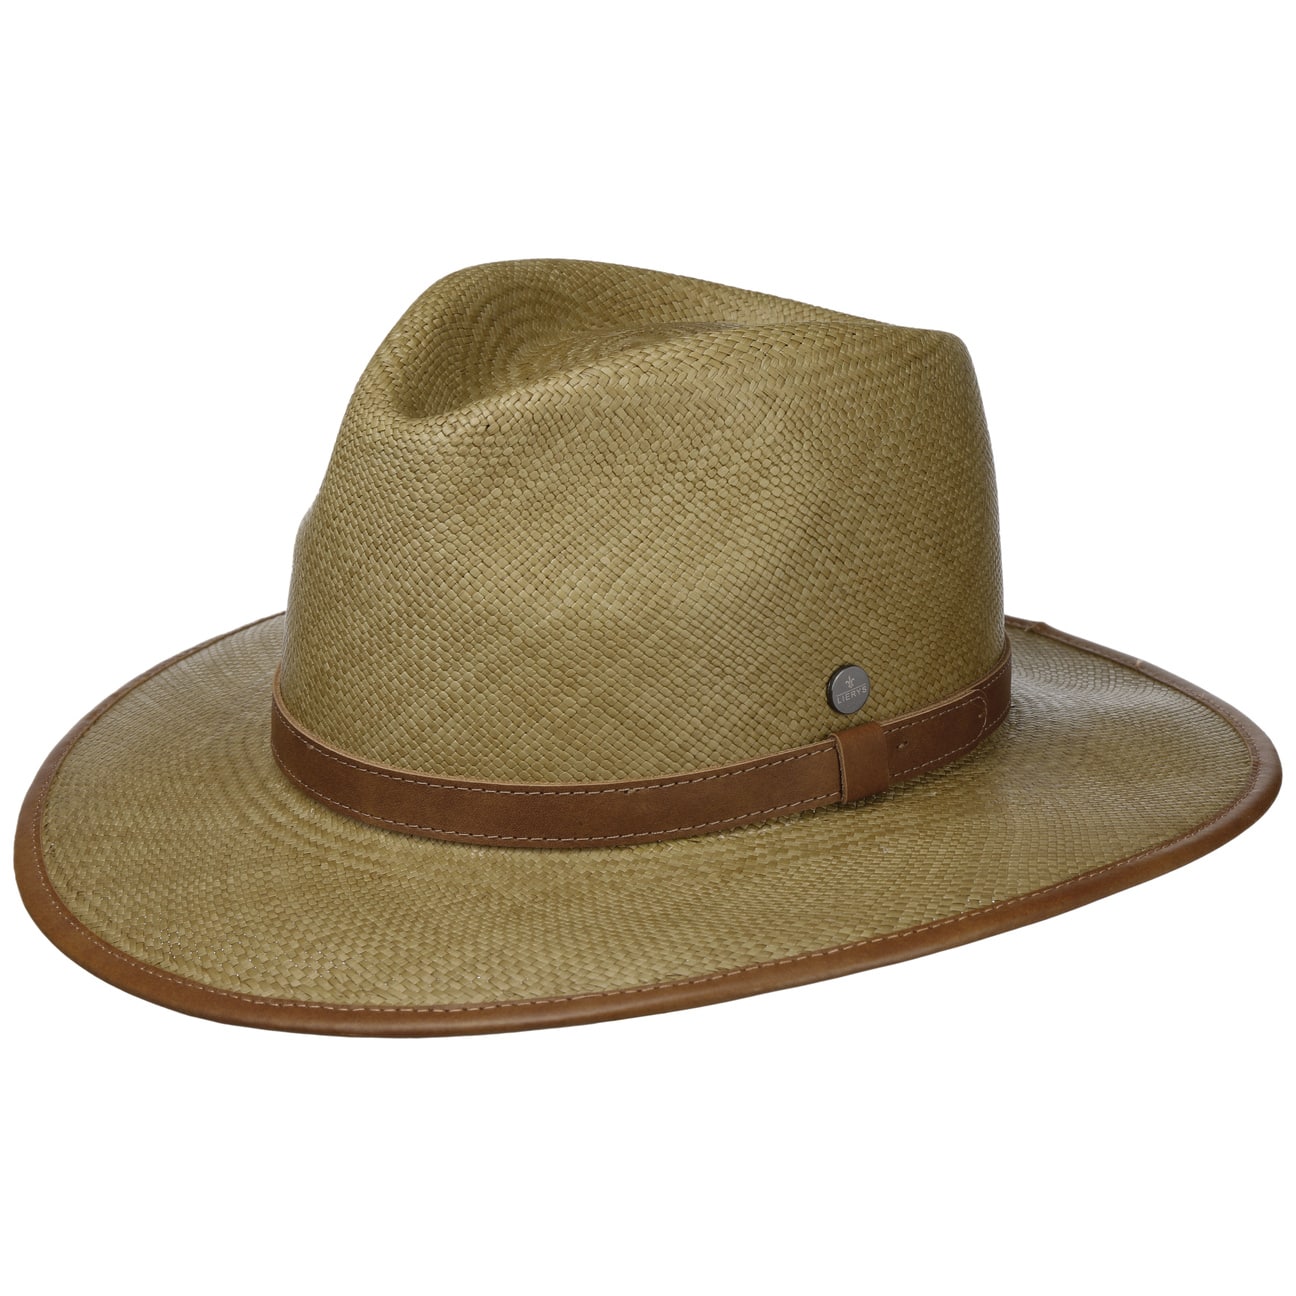 Carston Traveller Panama Hat by Lierys -->